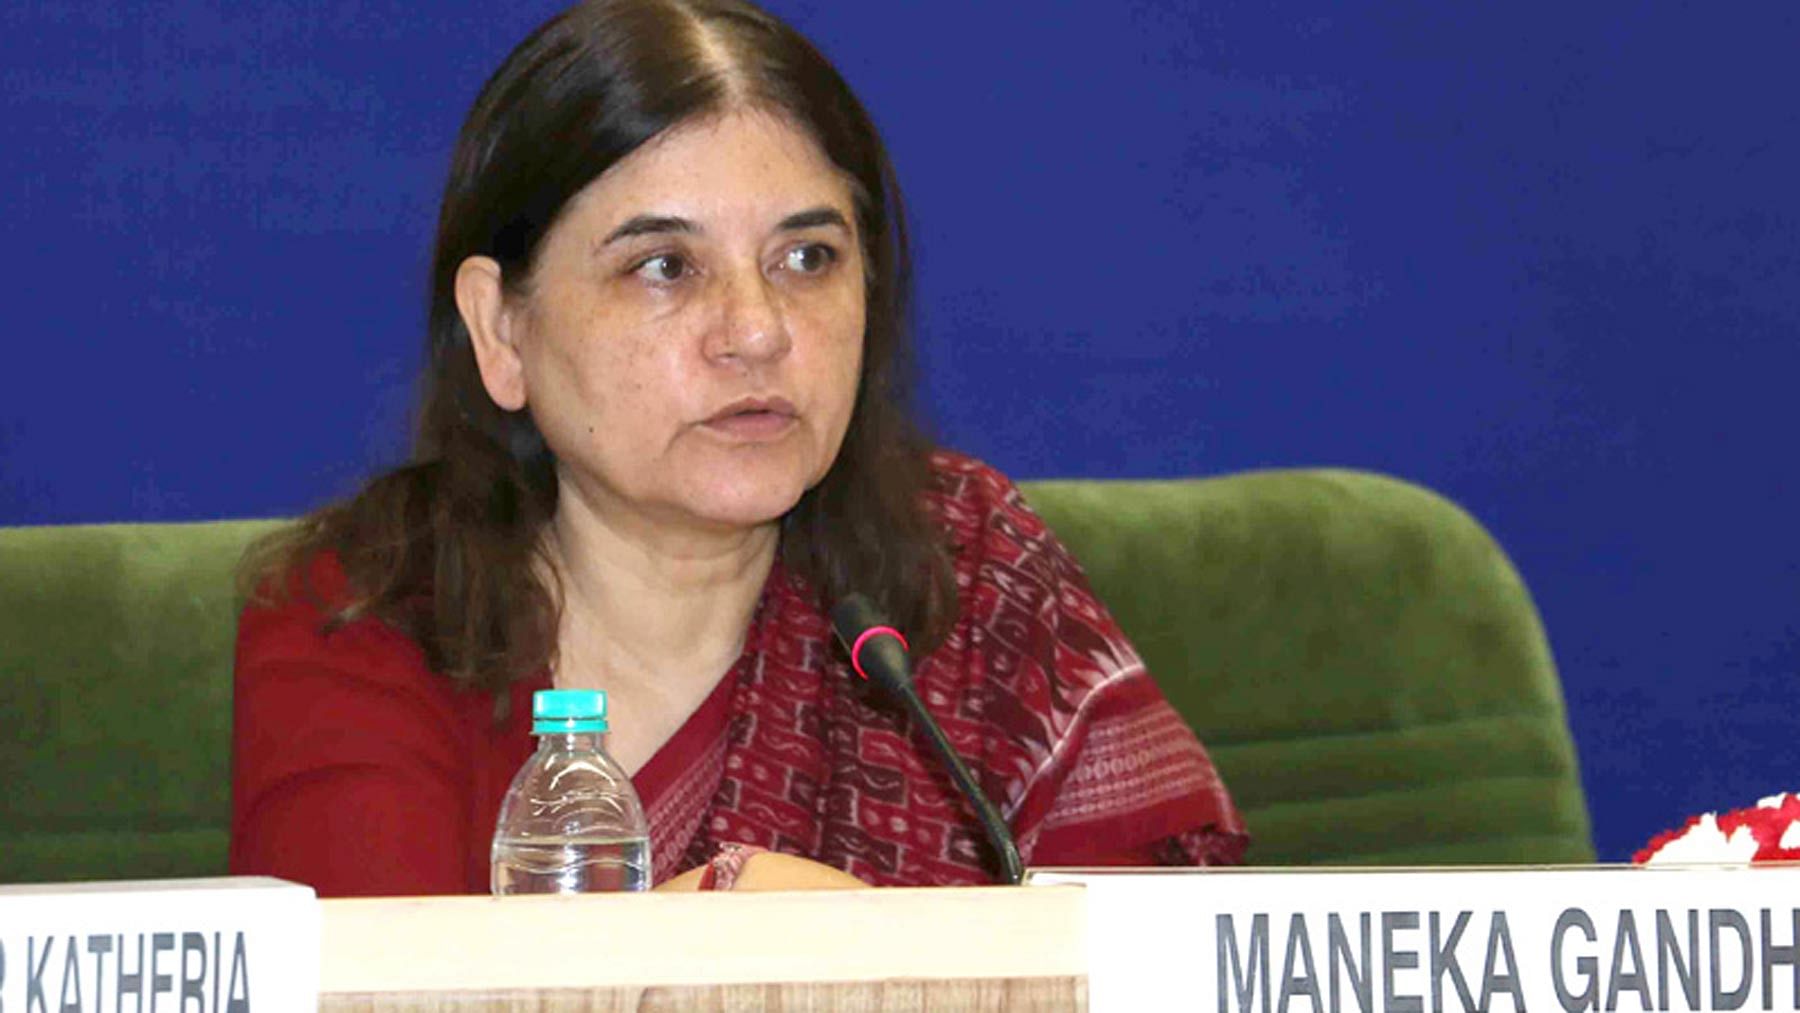 File photo of Union Minister of Women and Child Development Maneka Gandhi. (Photo: <a href="http://pib.nic.in/newsite/photoright.aspx?phid=68711">PIB</a>)